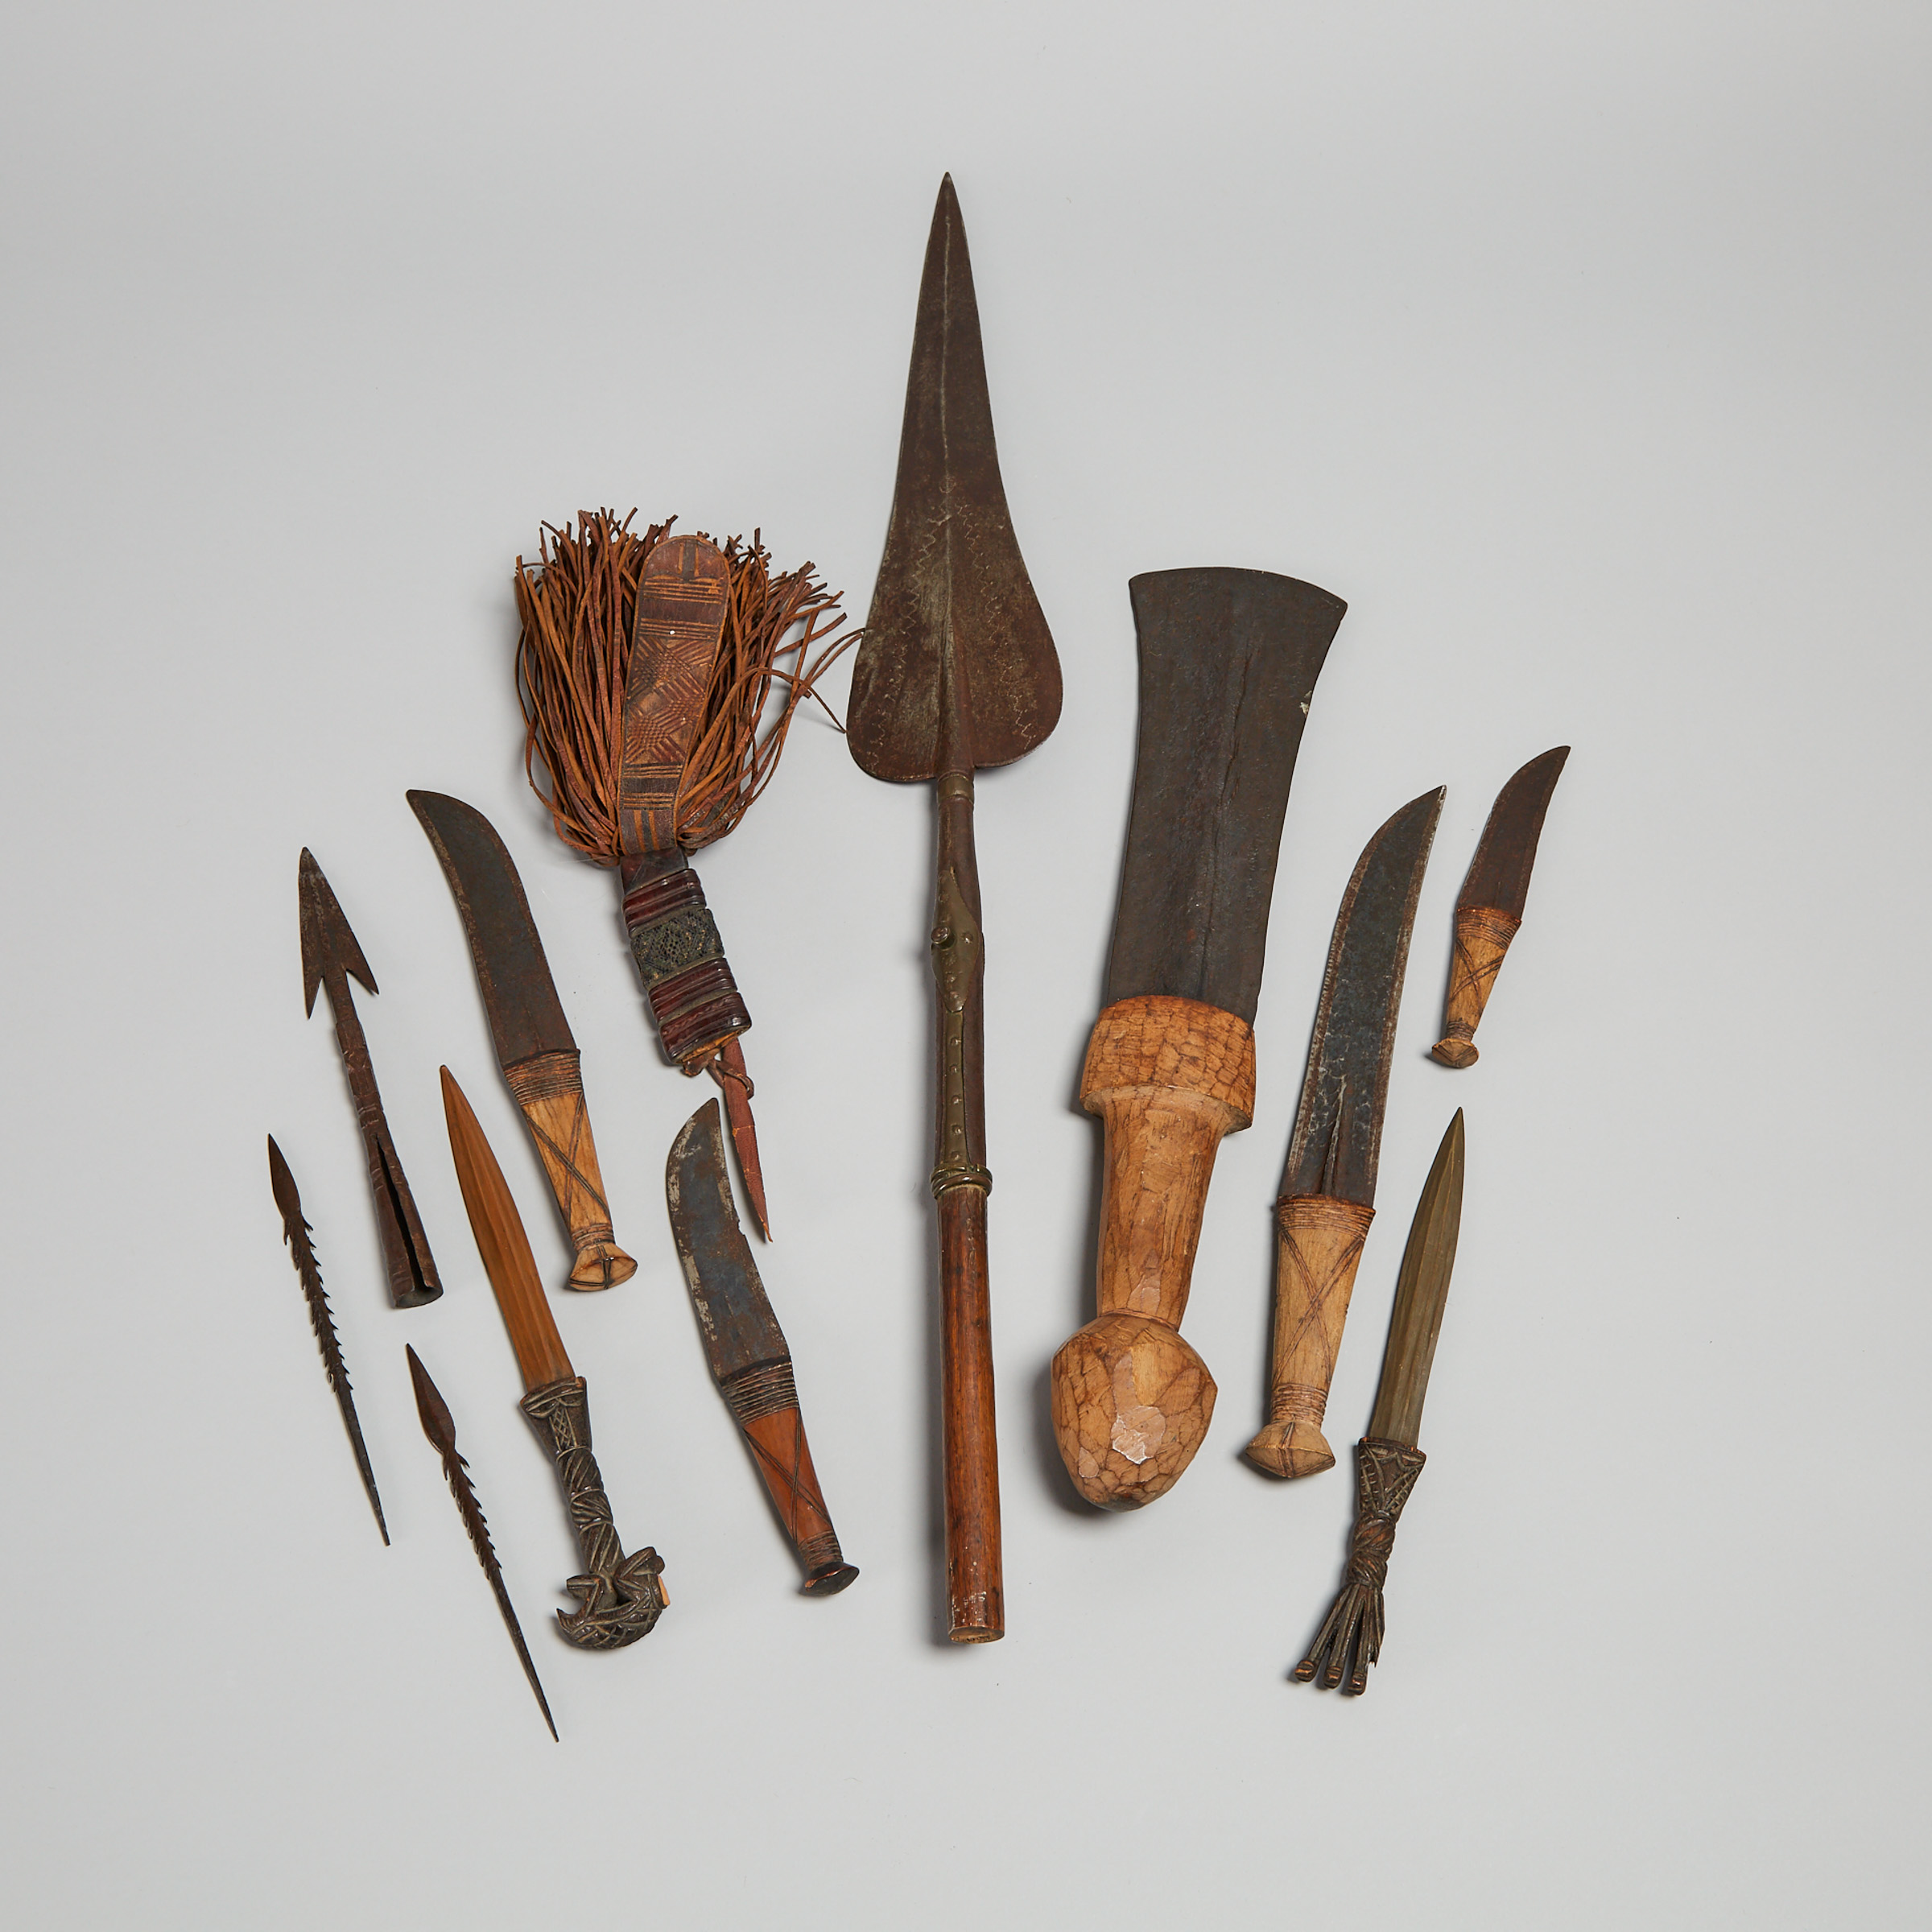 A Group of 11 African Edged Weapons